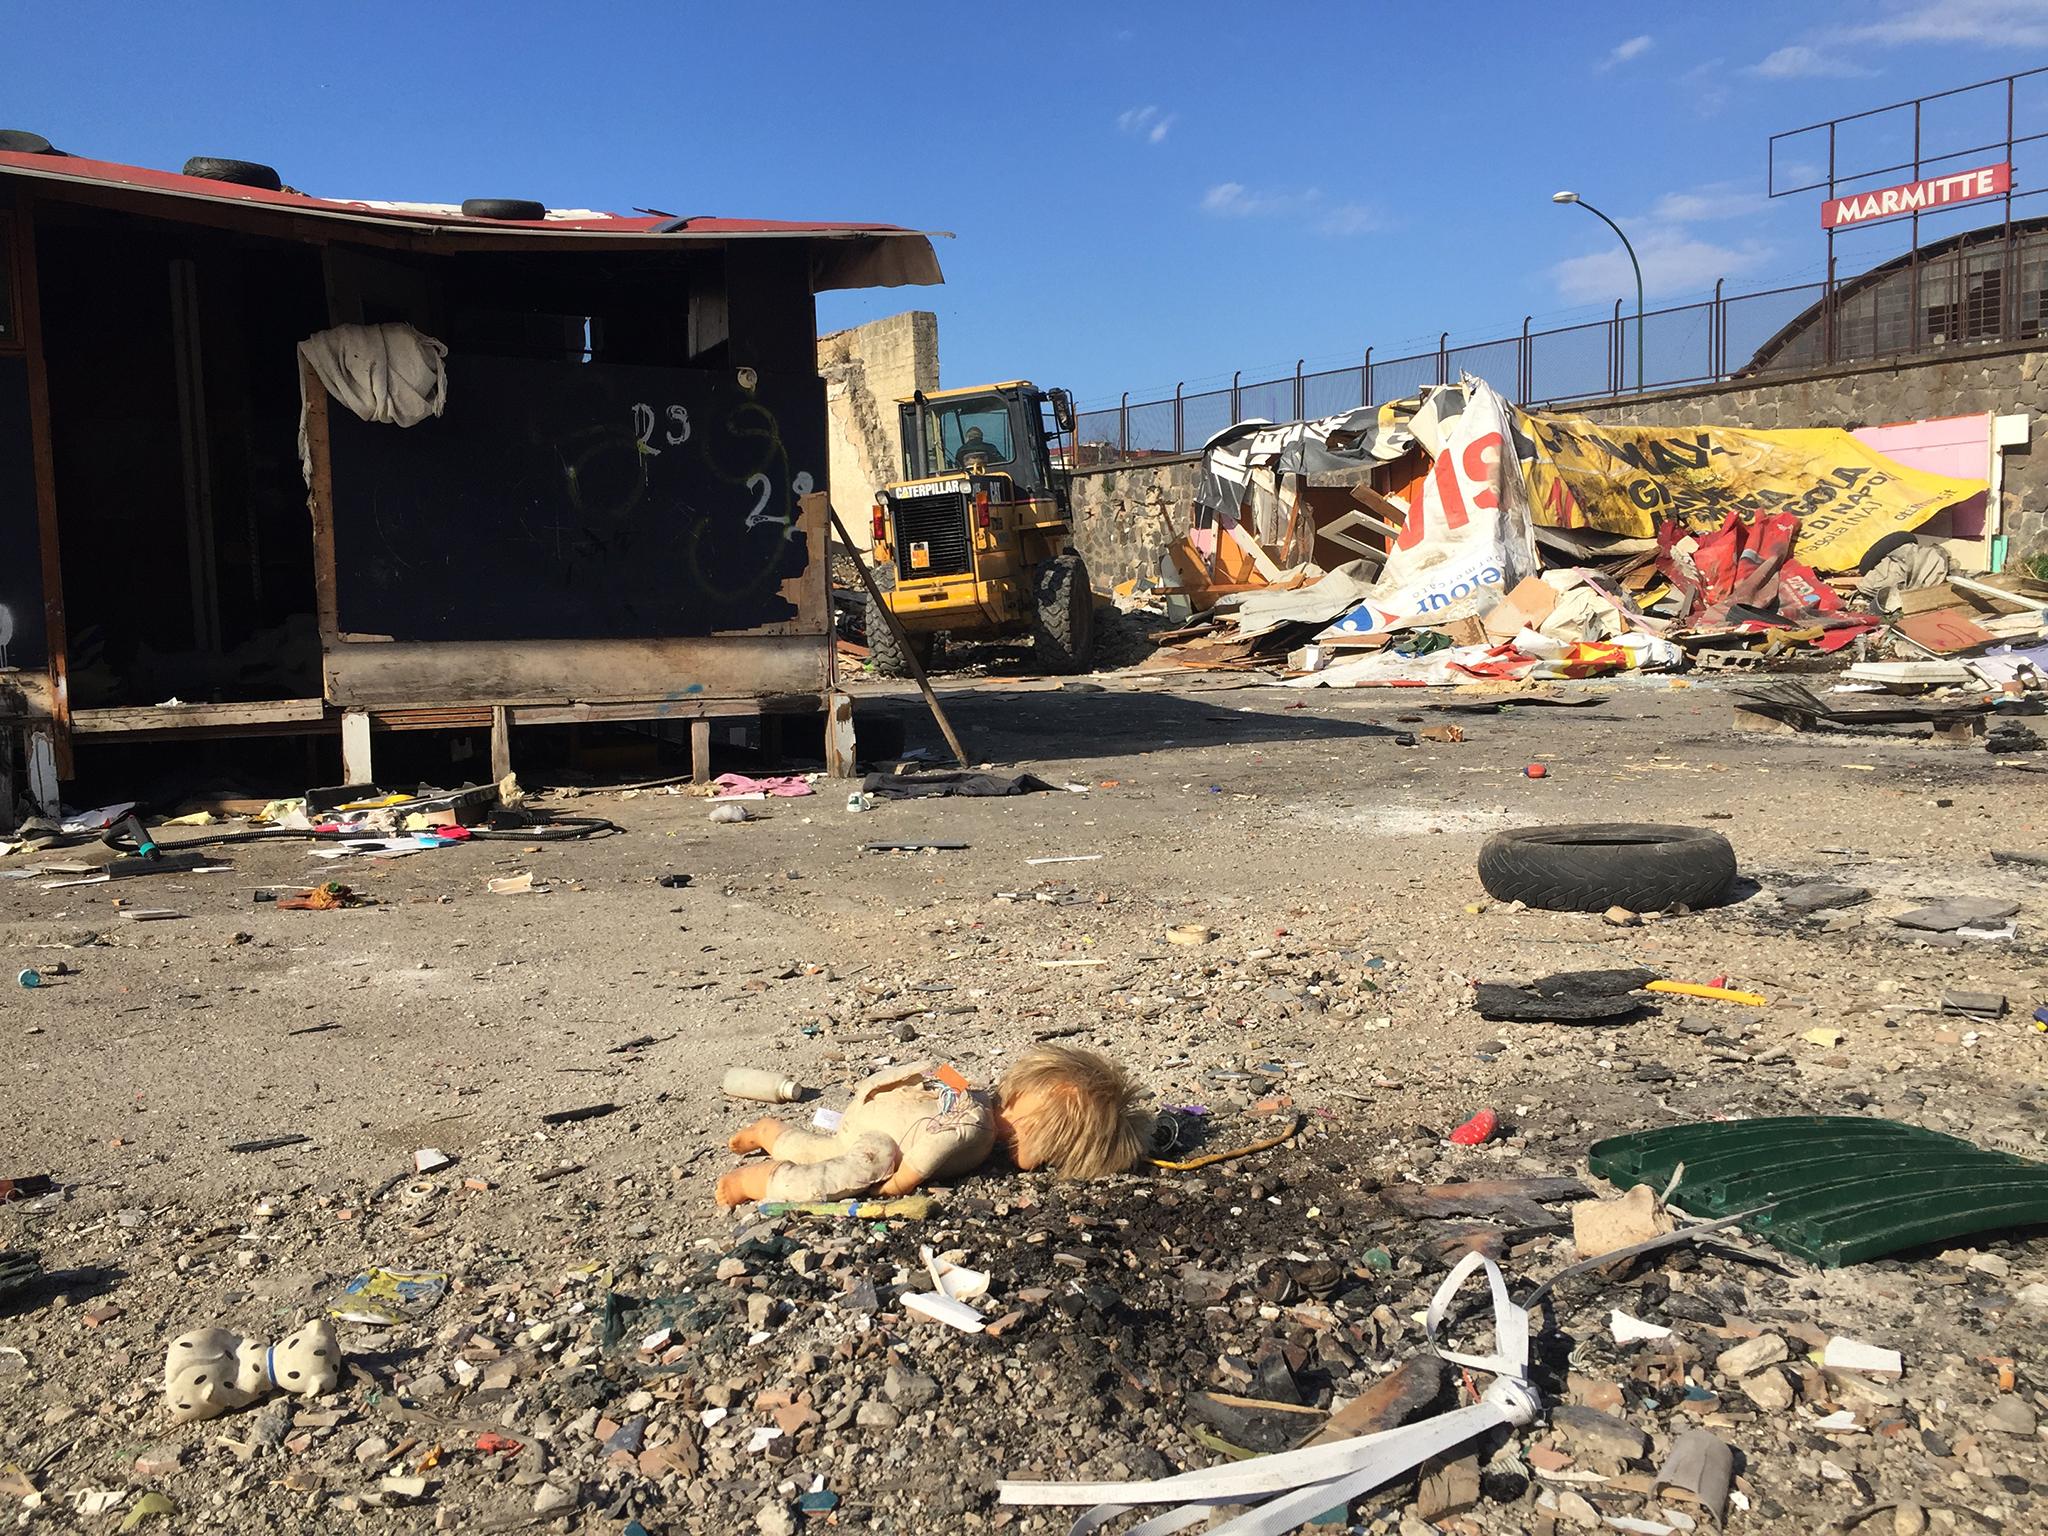 The Gianturco camp was demolished on the eve of International Roma Day